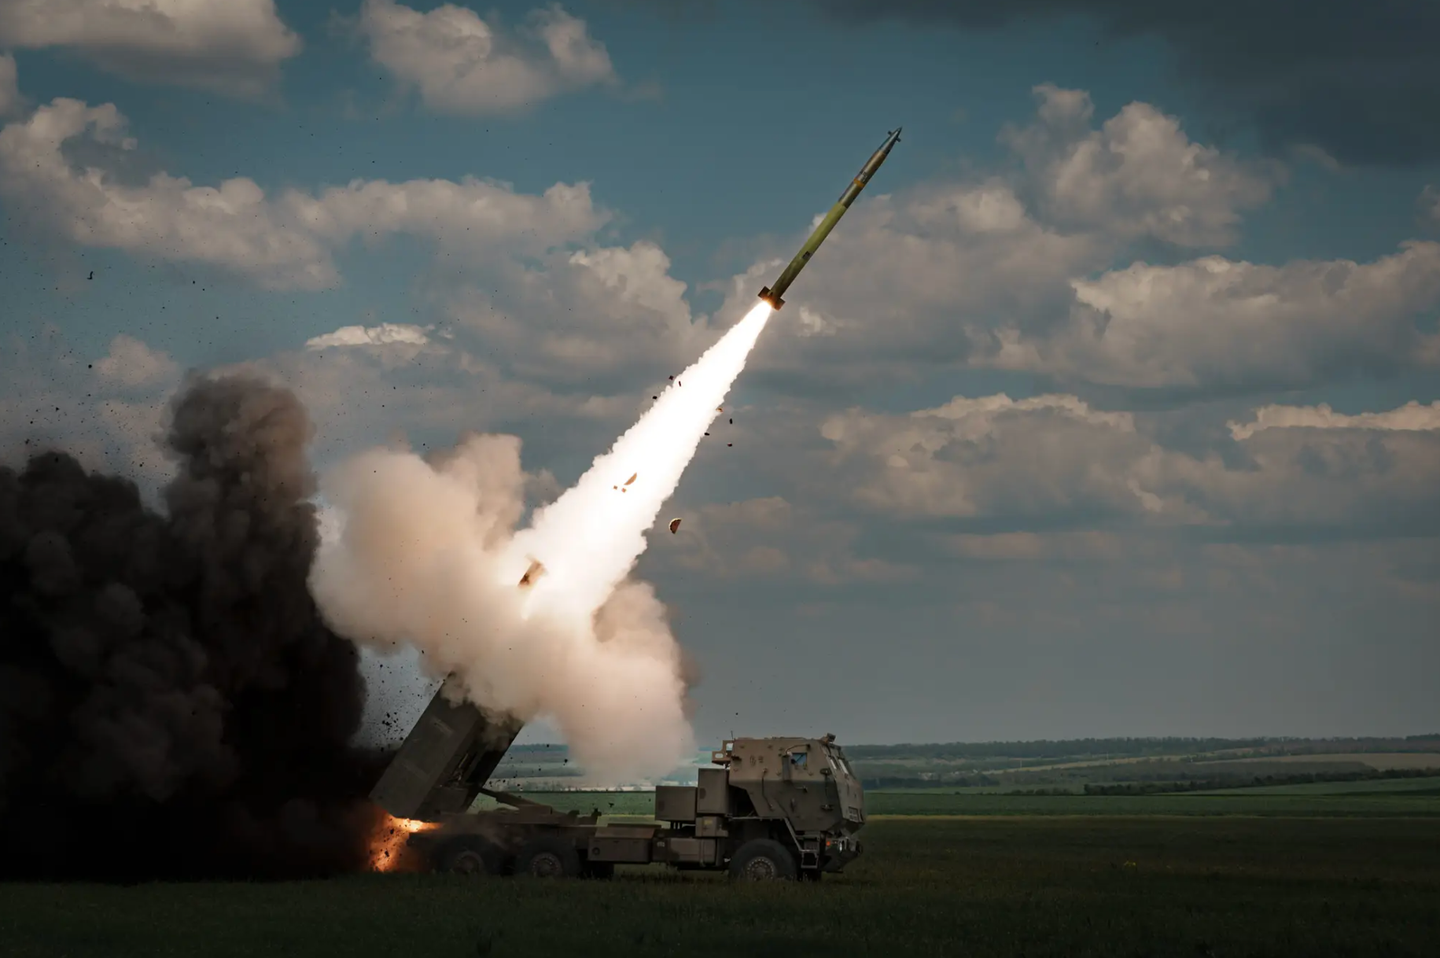 A Guided Multiple Launch Rocket System (GMLRS), launched by an M142 HIMARS in service with Ukraine <em>Photo by Serhii Mykhalchuk/Global Images Ukraine via Getty Images</em>